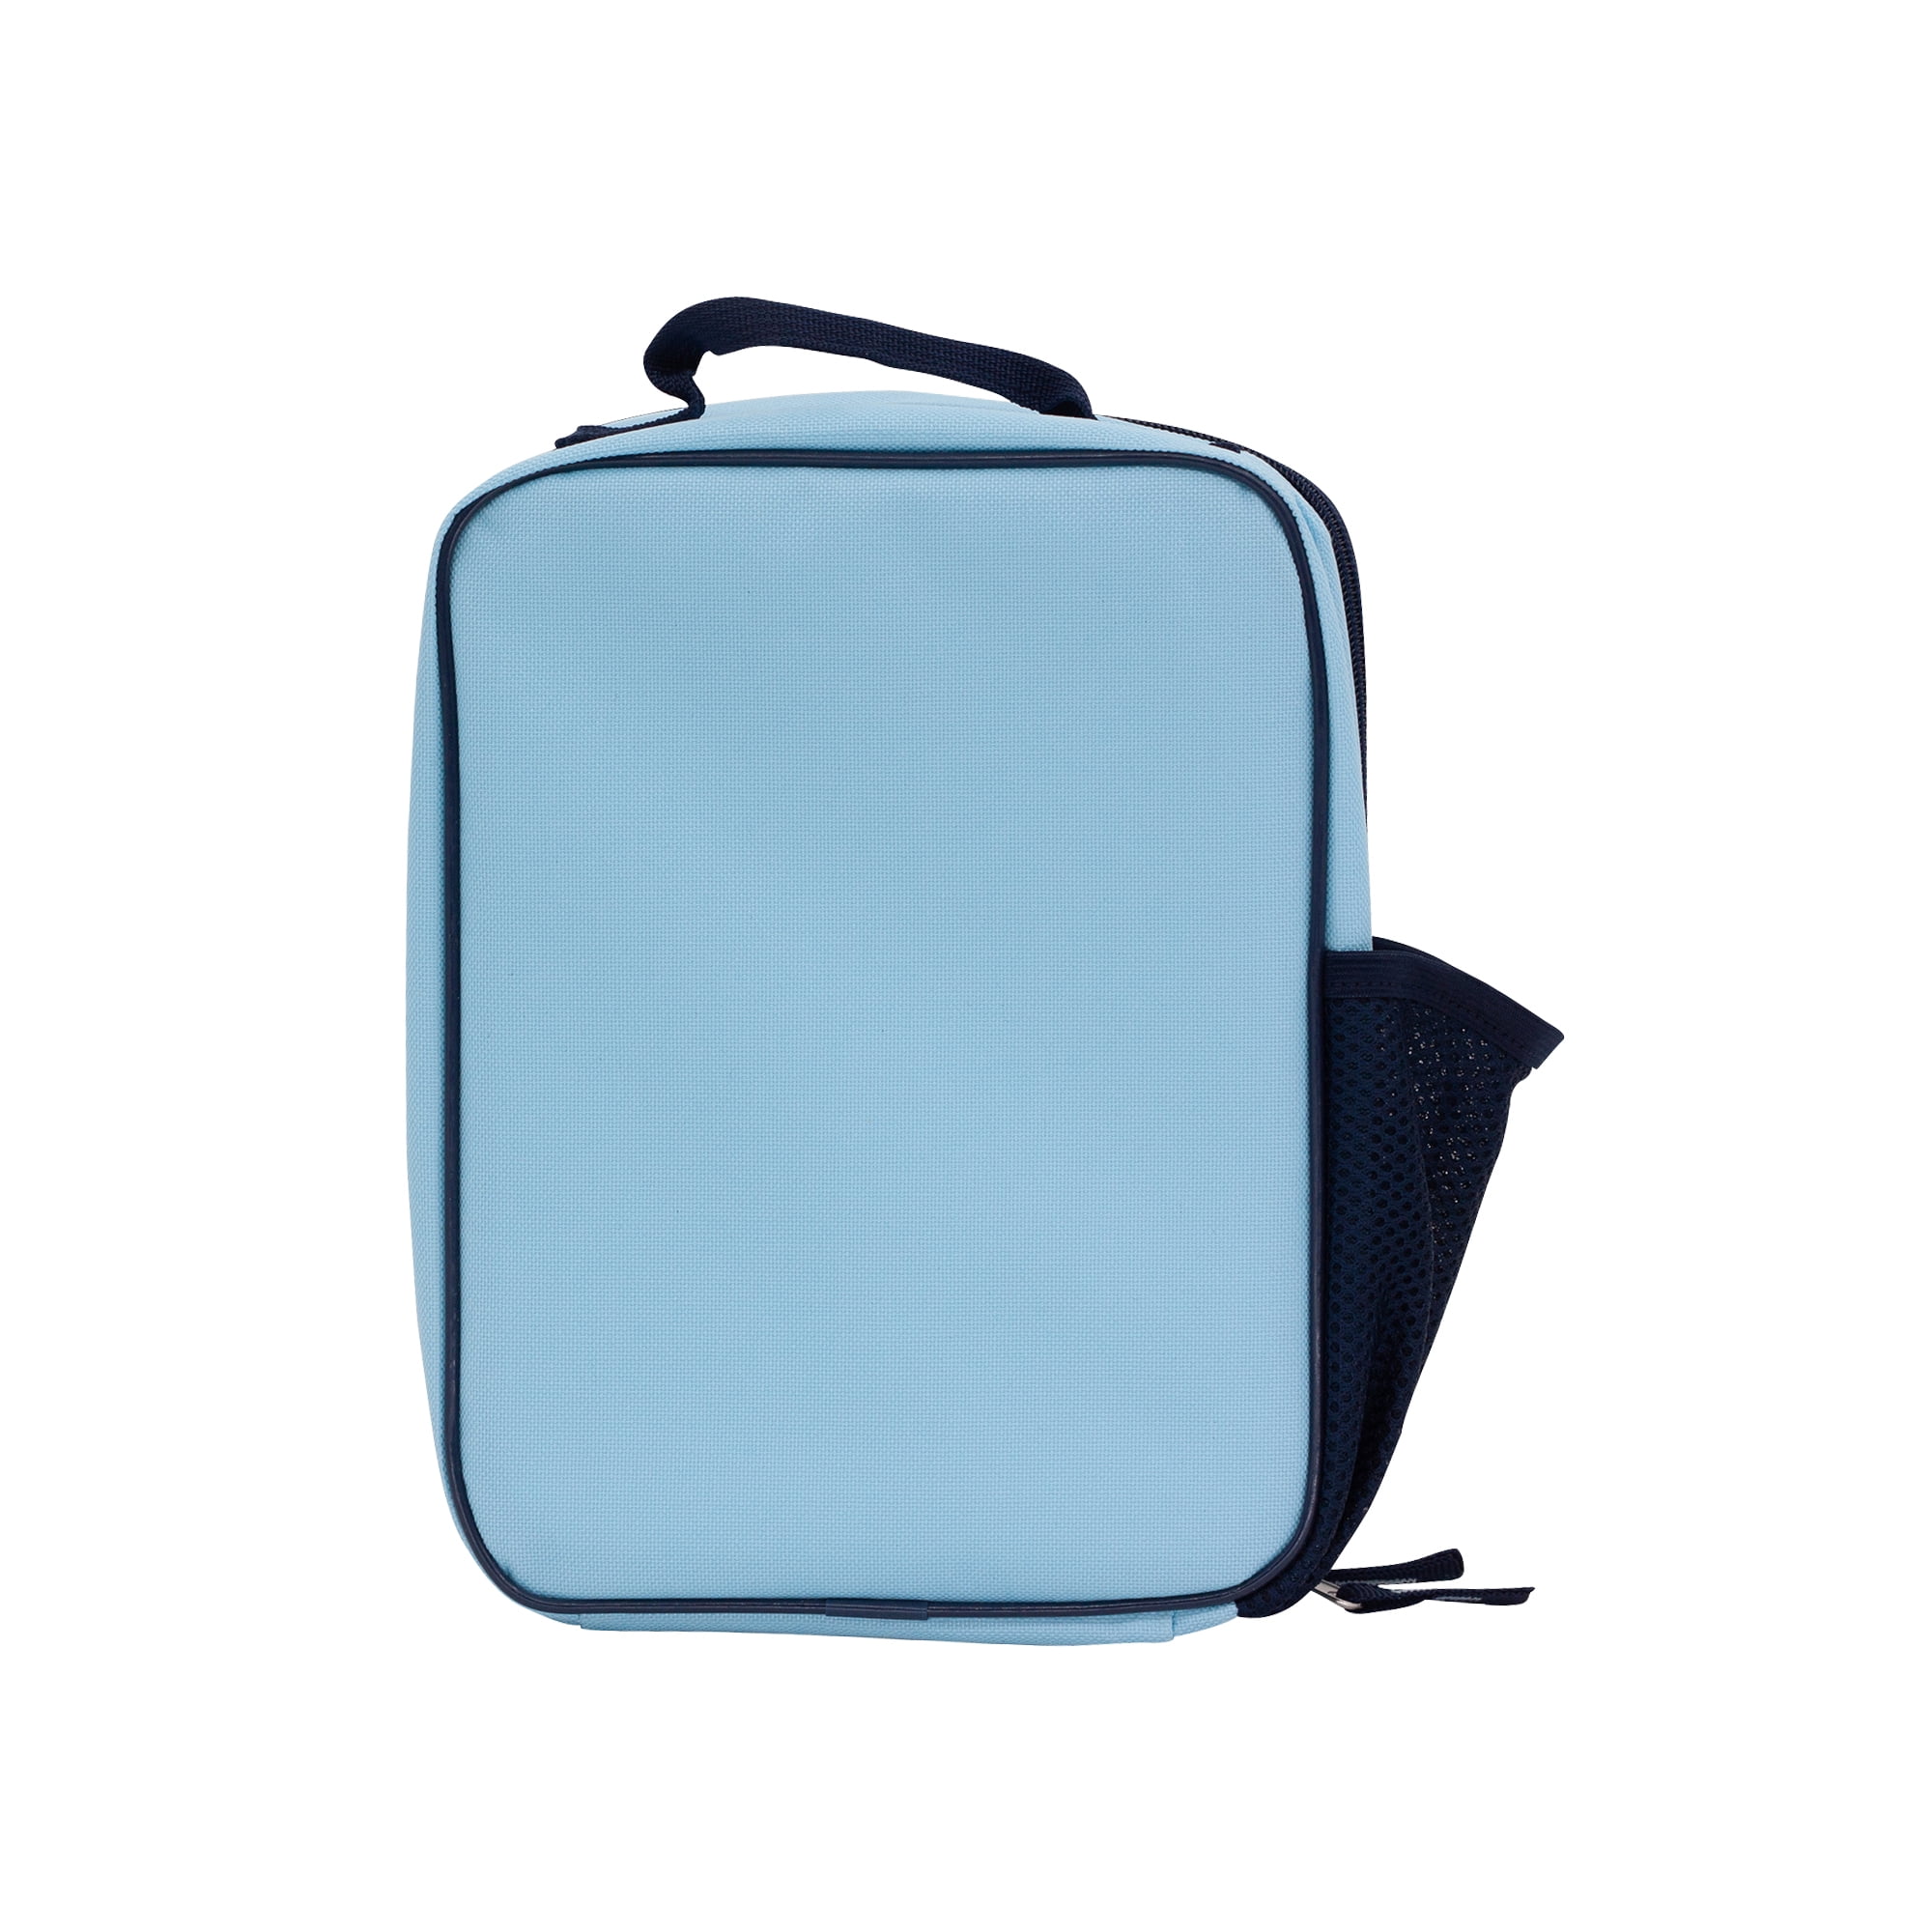 Bluey Kids Lunch Box Bluey And Bingo Raised Character Insulated Lunch Bag  Tote